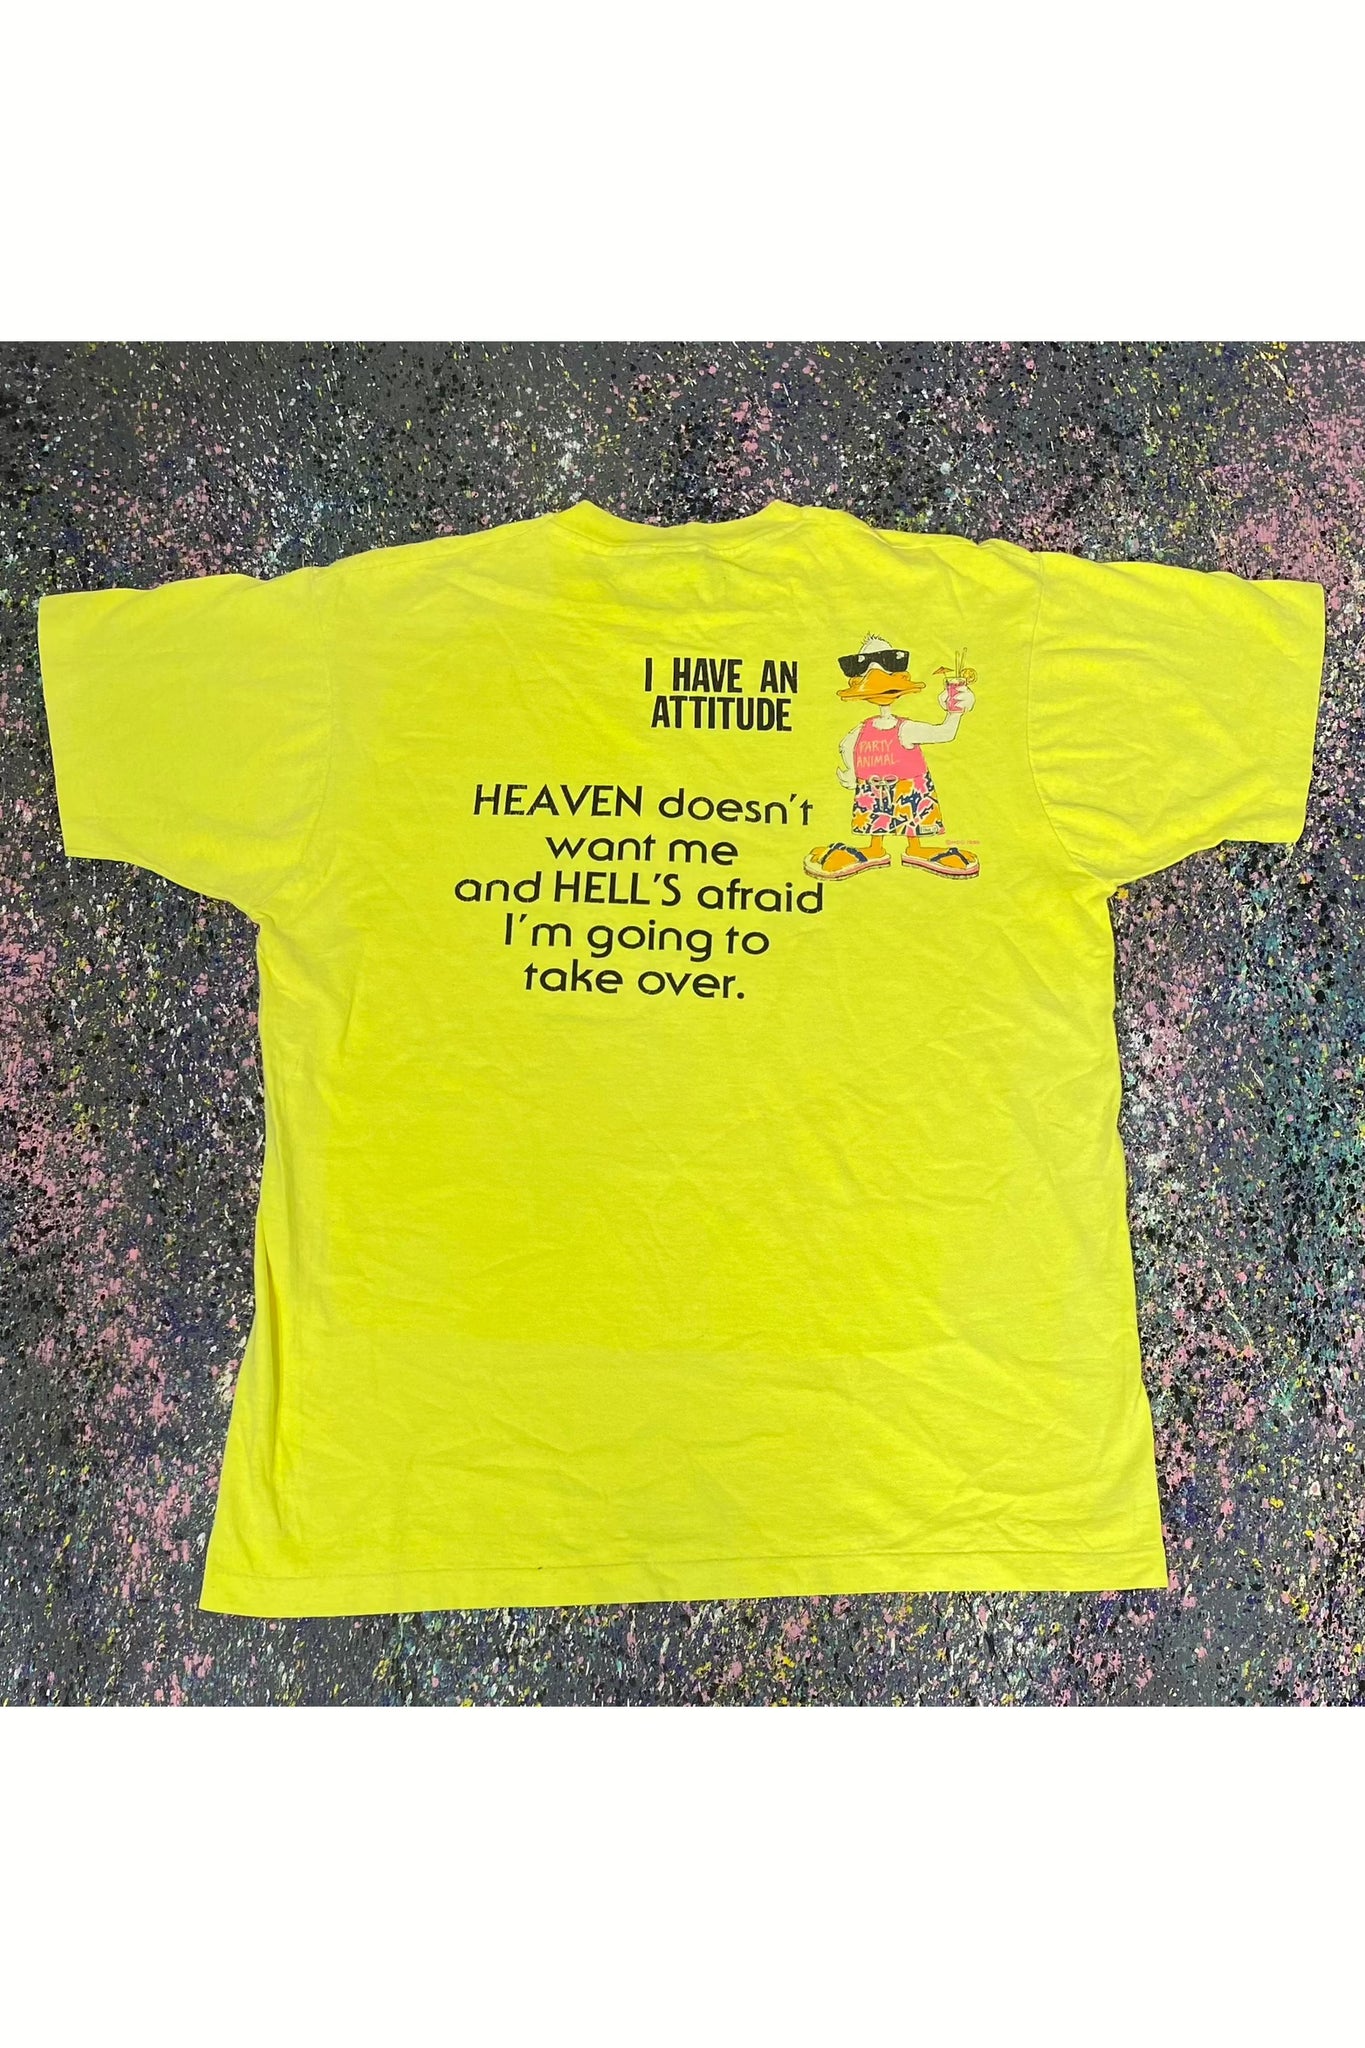 Vintage 1986 Fruit of The Loom 2 Hot I Have An Attitude Tee- XL